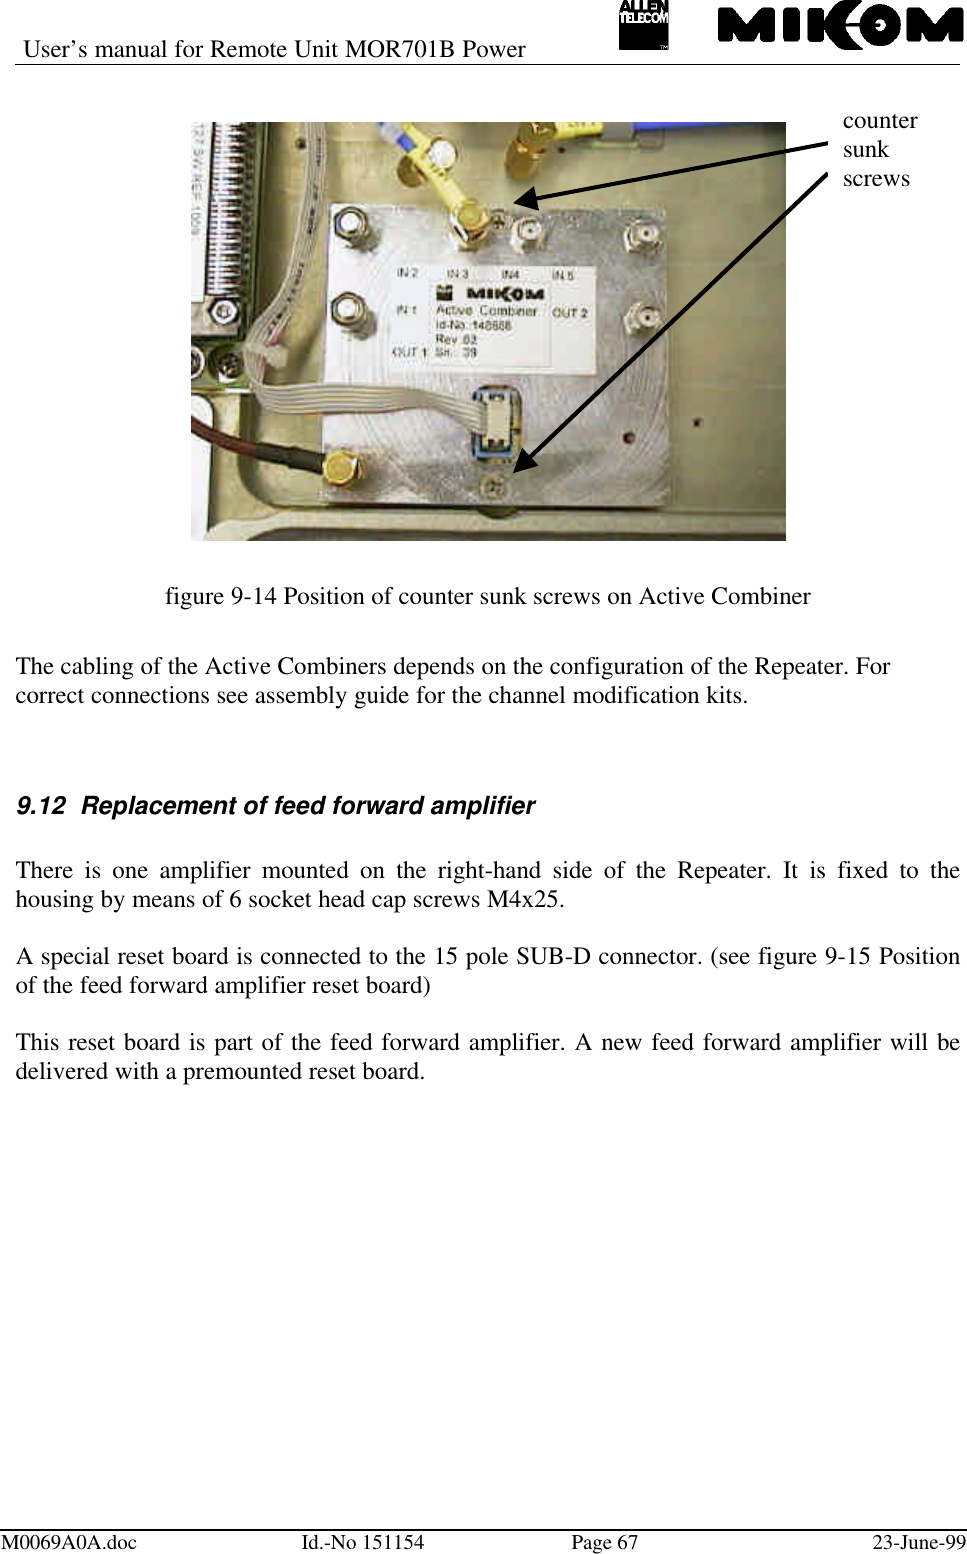 User’s manual for Remote Unit MOR701B PowerM0069A0A.doc Id.-No 151154 Page 67 23-June-99figure 9-14 Position of counter sunk screws on Active CombinerThe cabling of the Active Combiners depends on the configuration of the Repeater. Forcorrect connections see assembly guide for the channel modification kits.9.12 Replacement of feed forward amplifierThere is one amplifier mounted on the right-hand side of the Repeater. It is fixed to thehousing by means of 6 socket head cap screws M4x25.A special reset board is connected to the 15 pole SUB-D connector. (see figure 9-15 Positionof the feed forward amplifier reset board)This reset board is part of the feed forward amplifier. A new feed forward amplifier will bedelivered with a premounted reset board.countersunkscrews